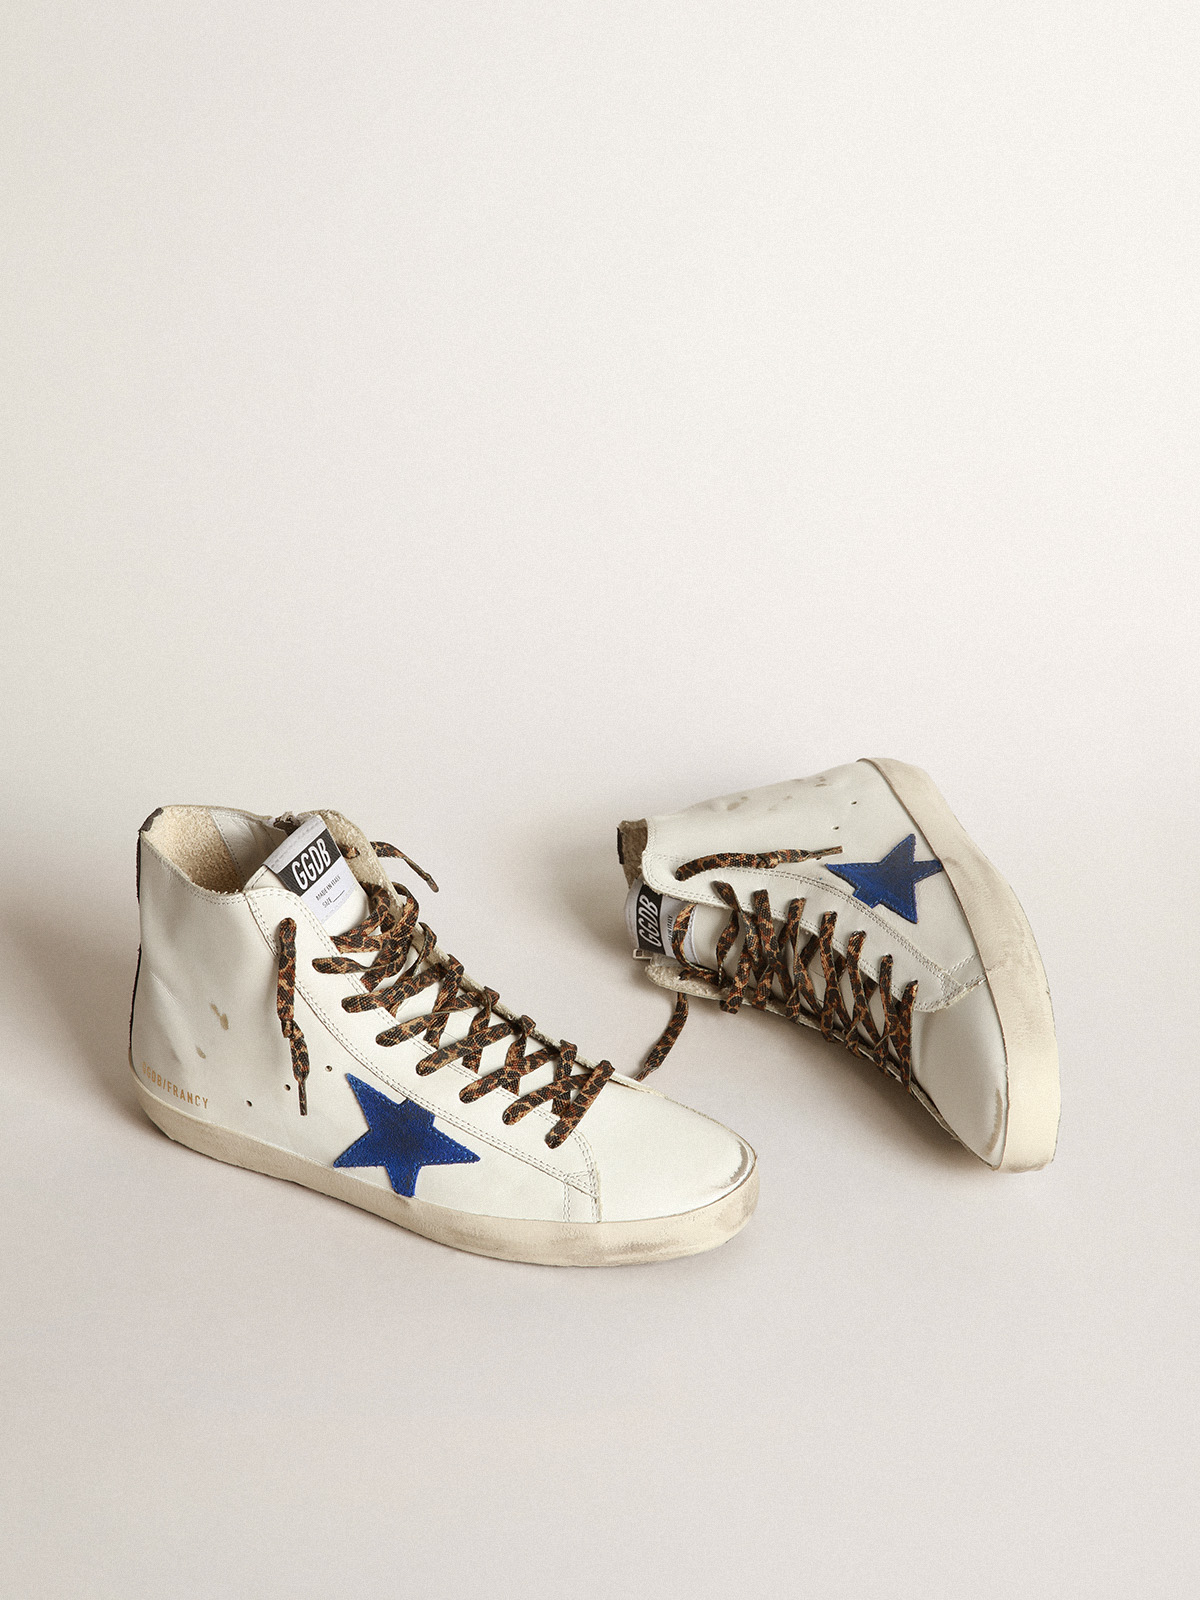 White Francy sneakers with blue star and leopard-print laces | Golden Goose